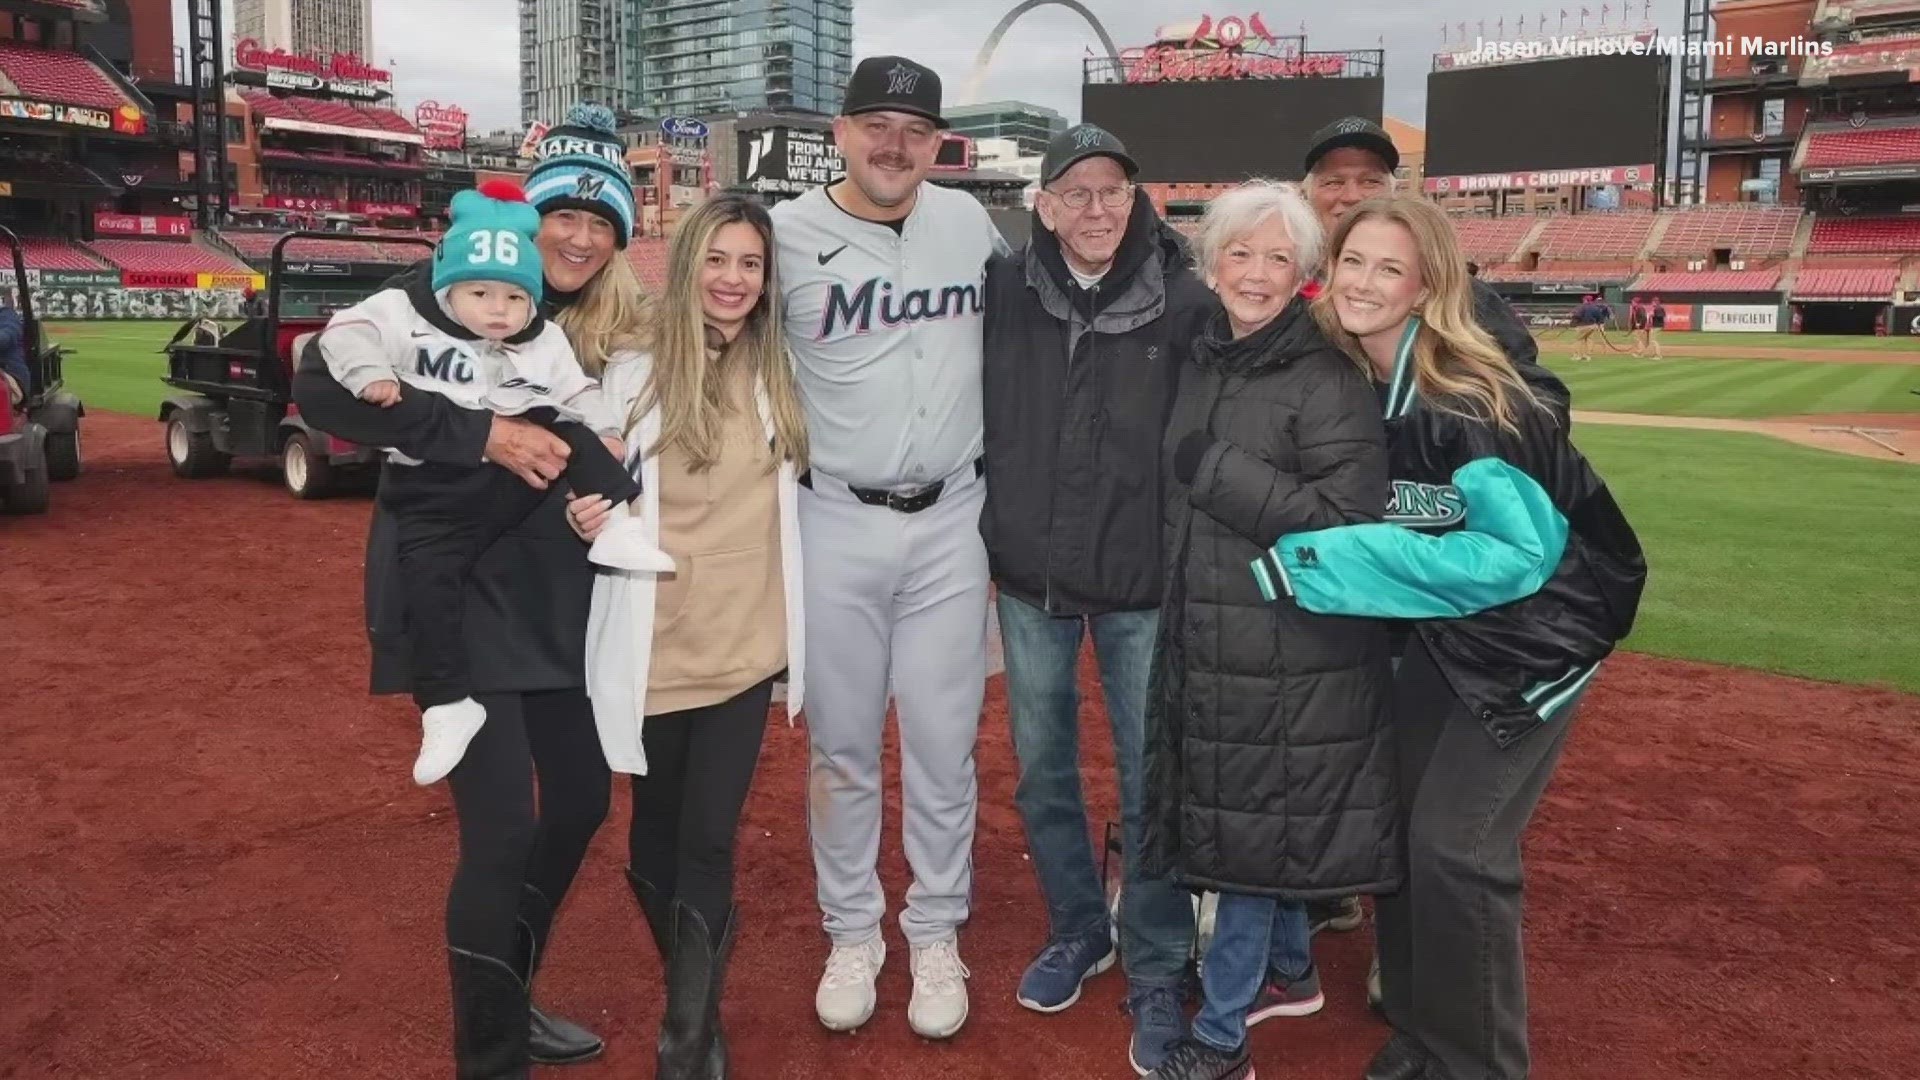 Burger's grandparents had never seen him play in person before this weekend. He made it a memorable first time with two opening day home runs back home in St. Louis.